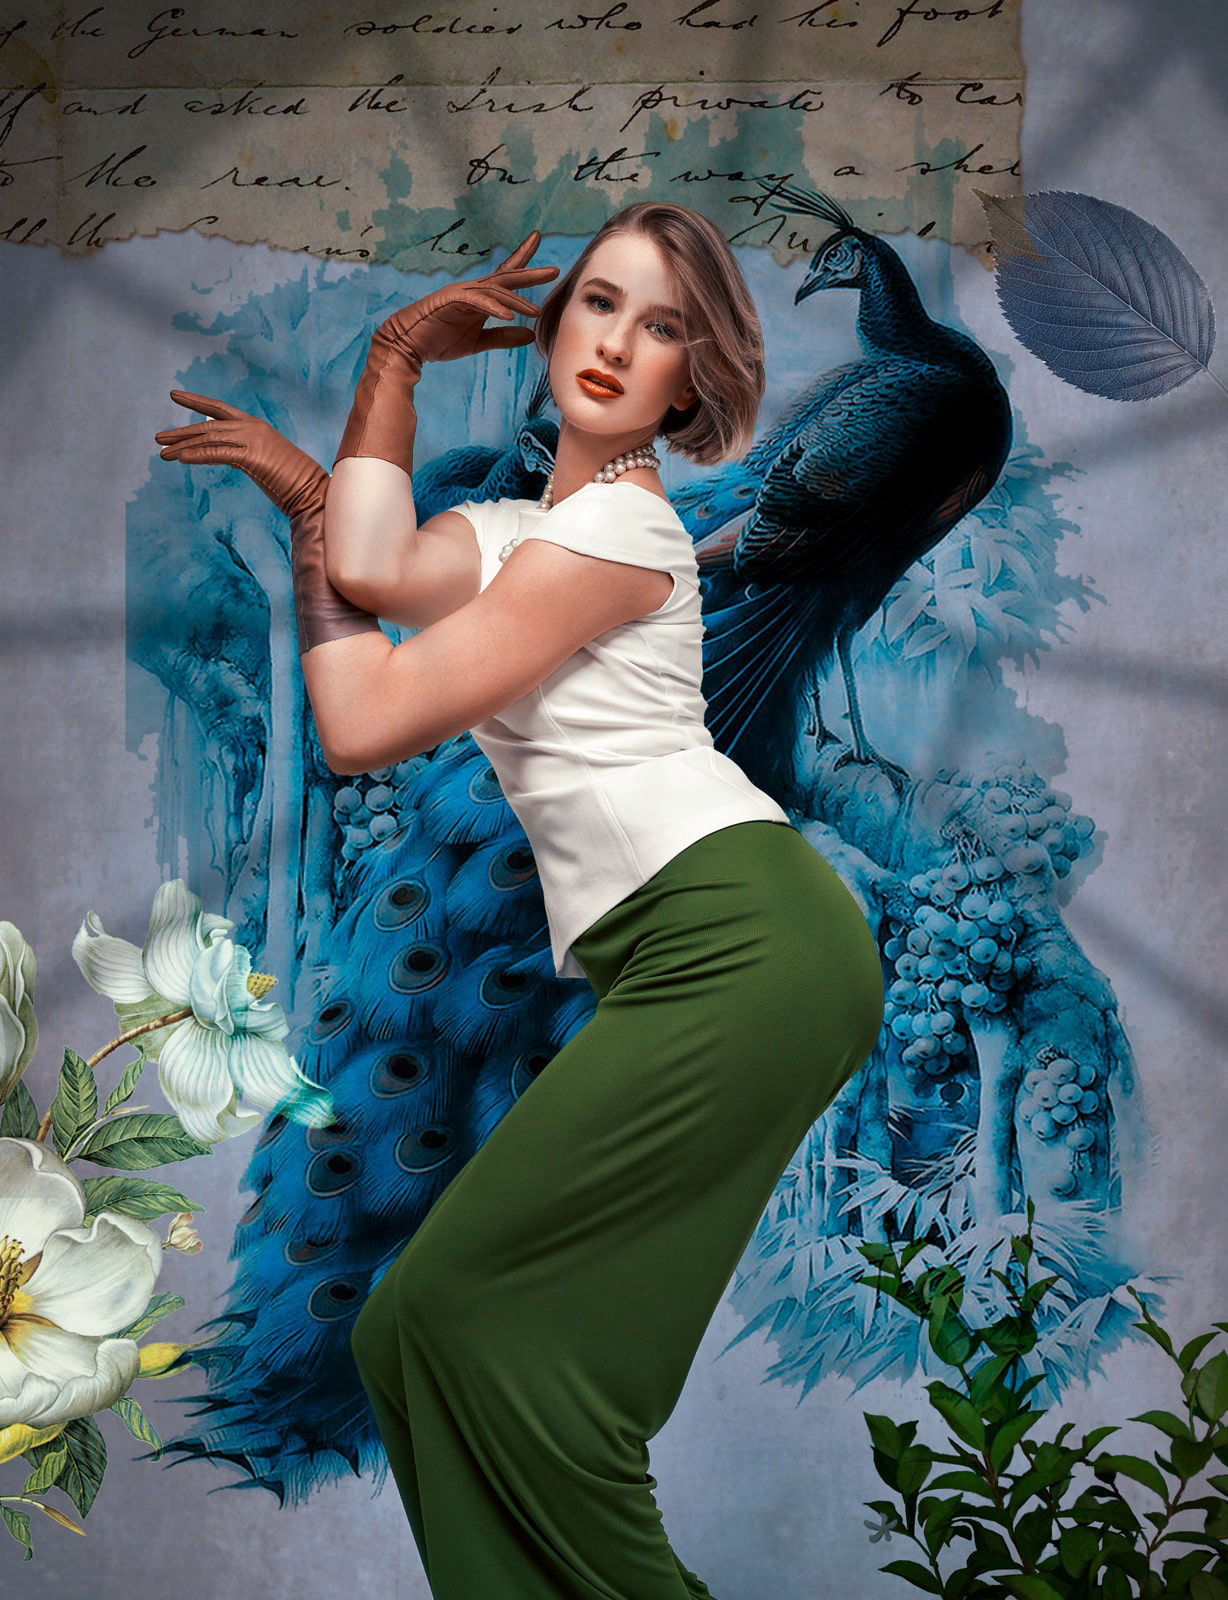 Fine art photography inspired by Art Nouveau